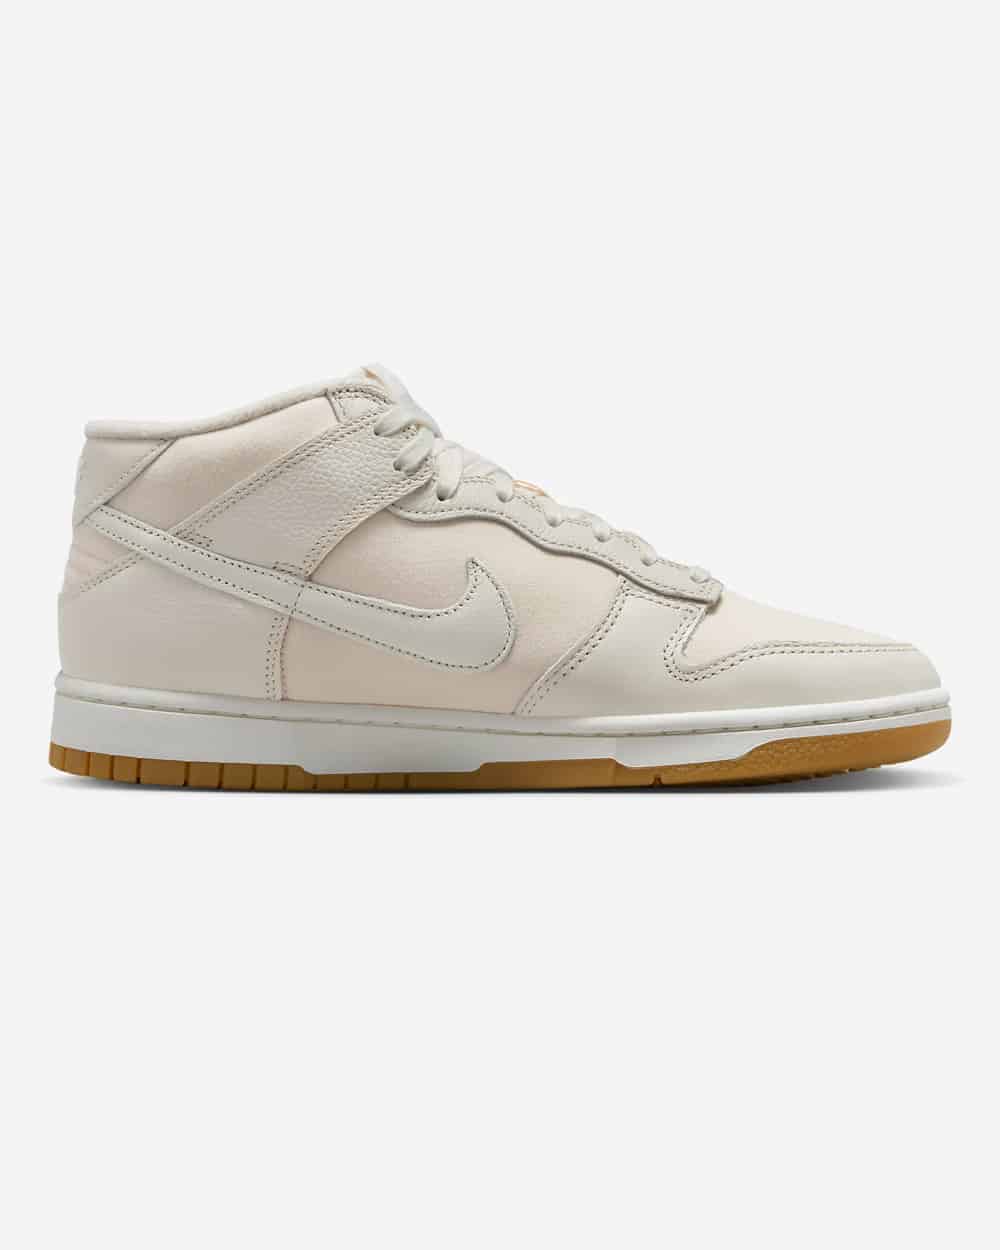 Nike Dunk Mid With Gum Sole